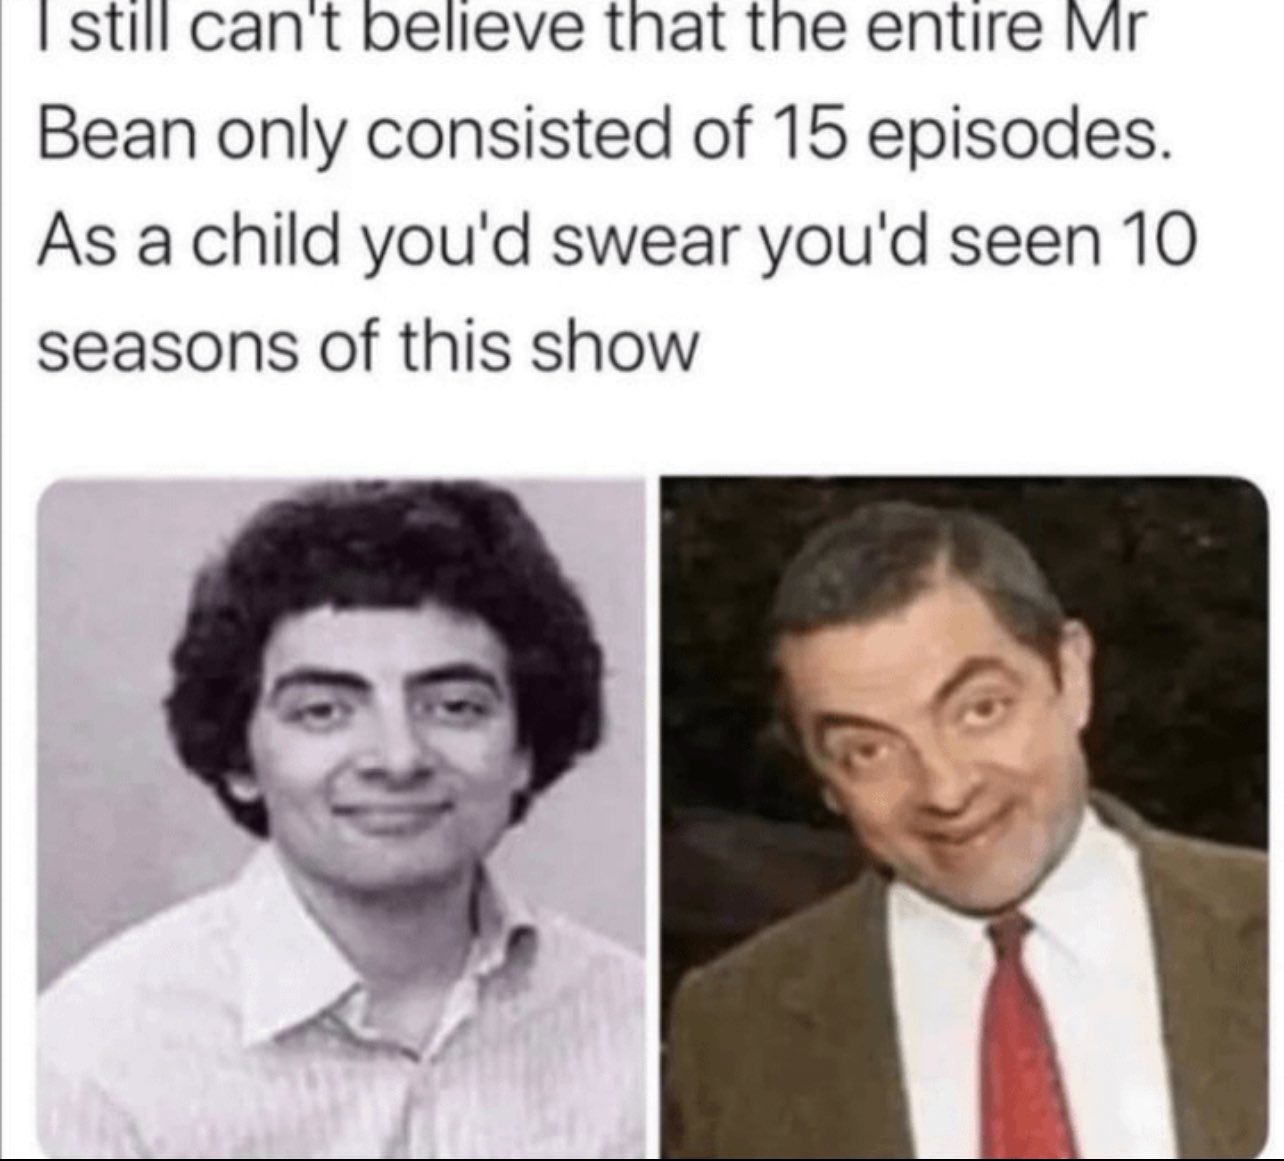 internet hall of  fame - head - I still can't believe that the entire Mr Bean only consisted of 15 episodes. As a child you'd swear you'd seen 10 seasons of this show